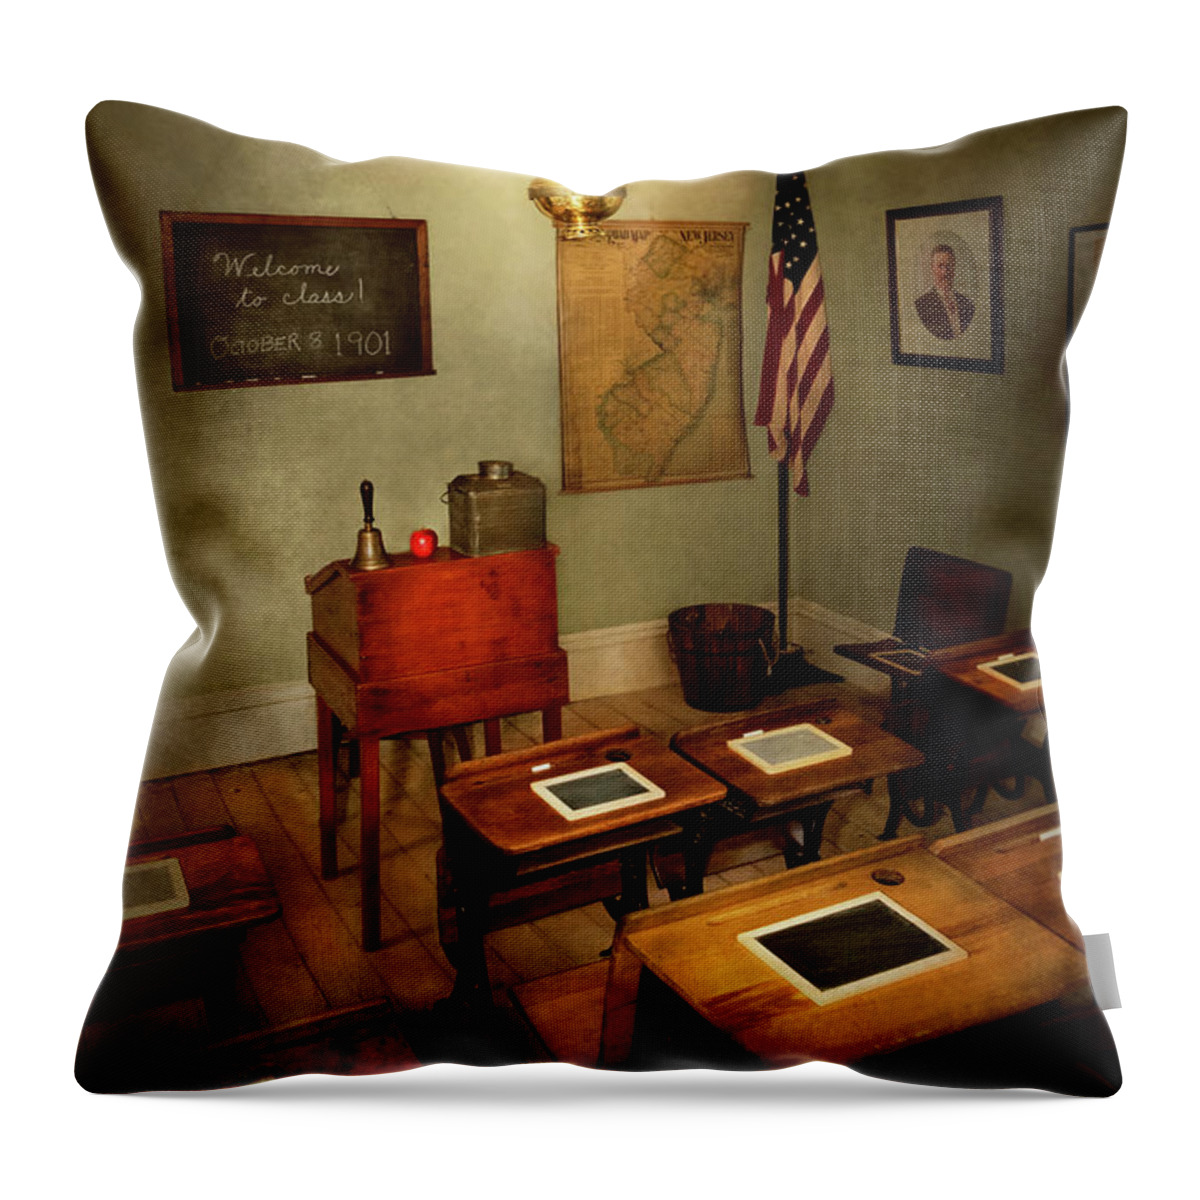 School Throw Pillow featuring the photograph School - Classroom - Welcome to class by Mike Savad